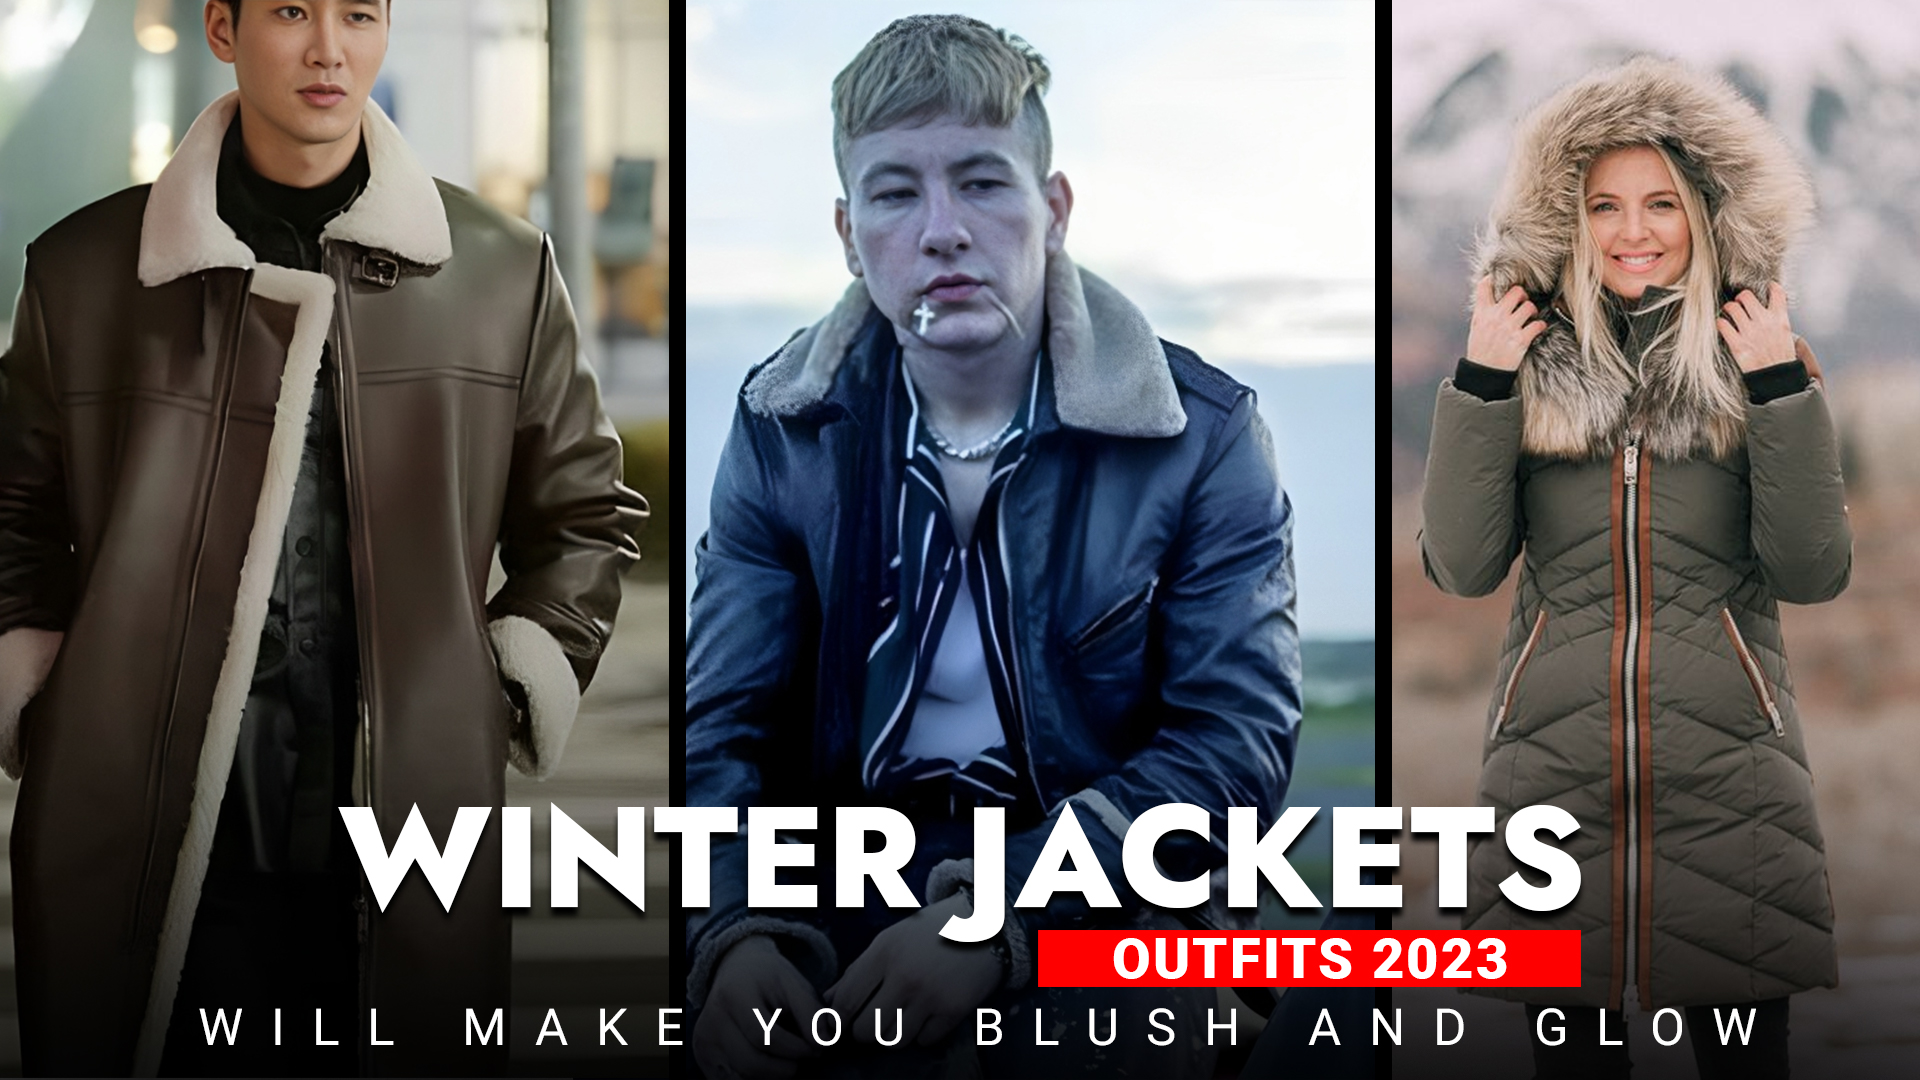 Winter Jackets Outfits 2023 Will Make You Blush And Glow